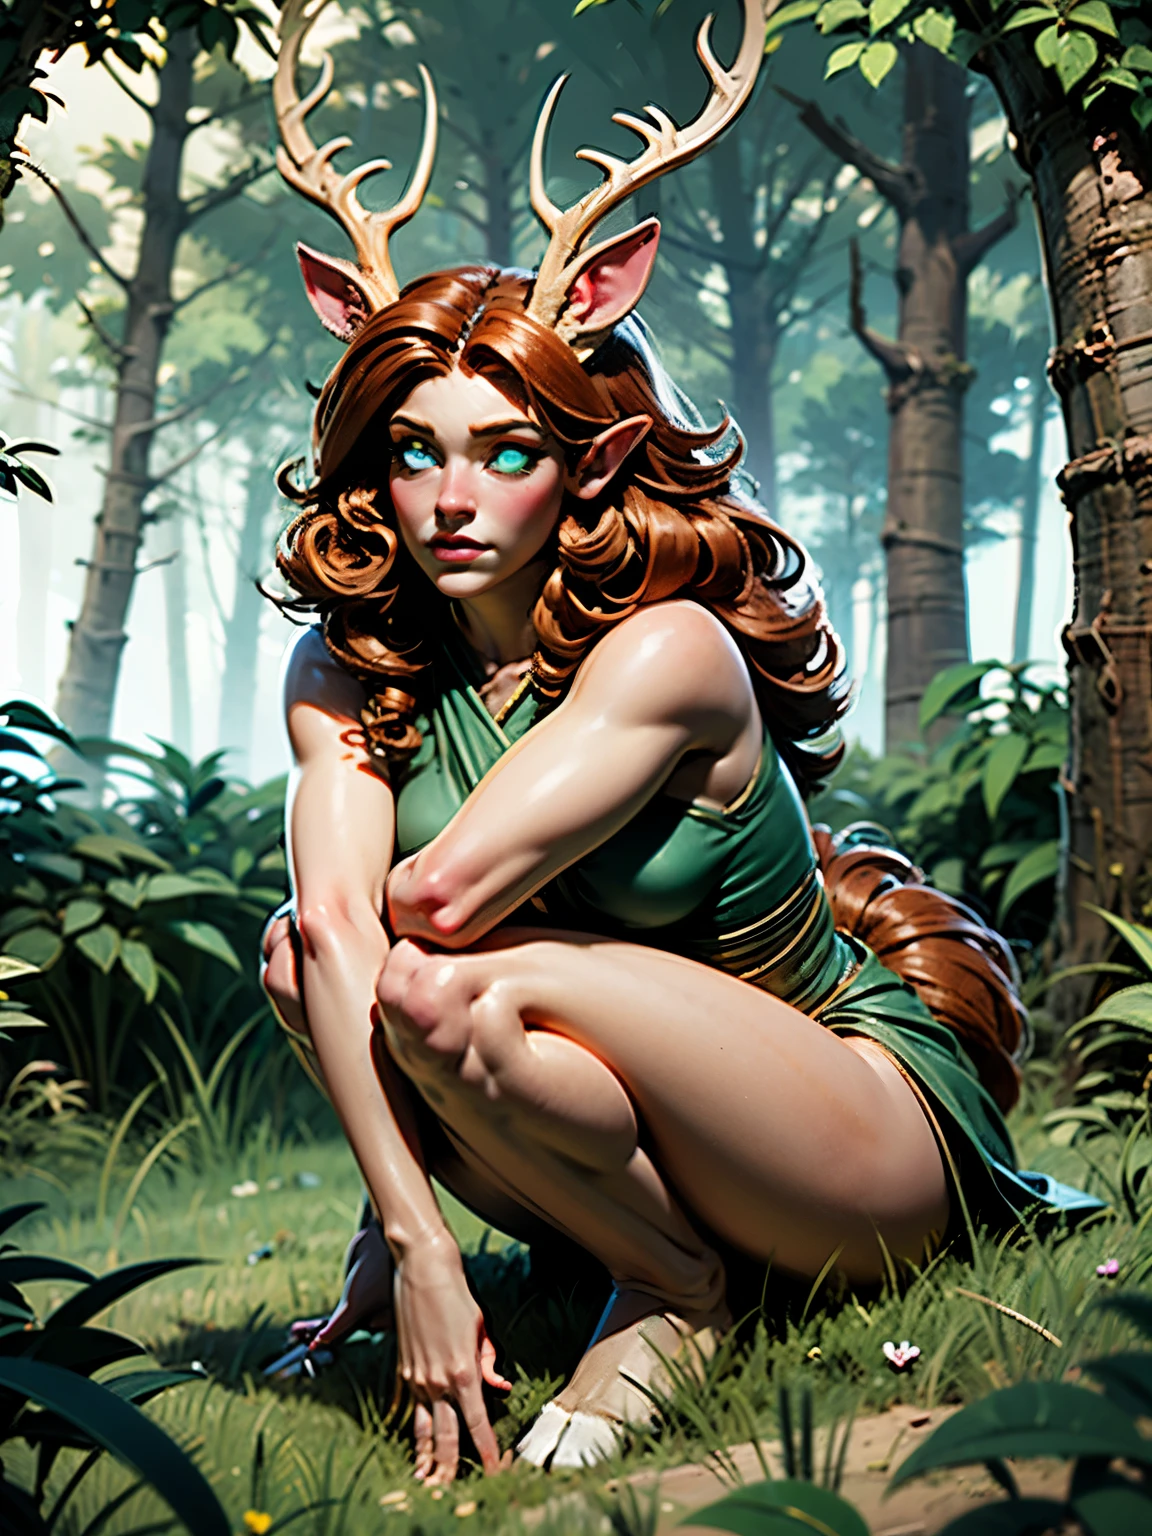 masterpiece, highly-detailed, hyper realistic, full-body shot of a small beautiful druid female laying in the grass in the middle of the forest, perfect face features, thin deer-like nose, thick kissable parted lips, expressive glowing green eyes with sad look, pointy ears, curly ginger hair, stag horns, perfect small size body shape curvy and fit, hooved feet, Deer-like feet